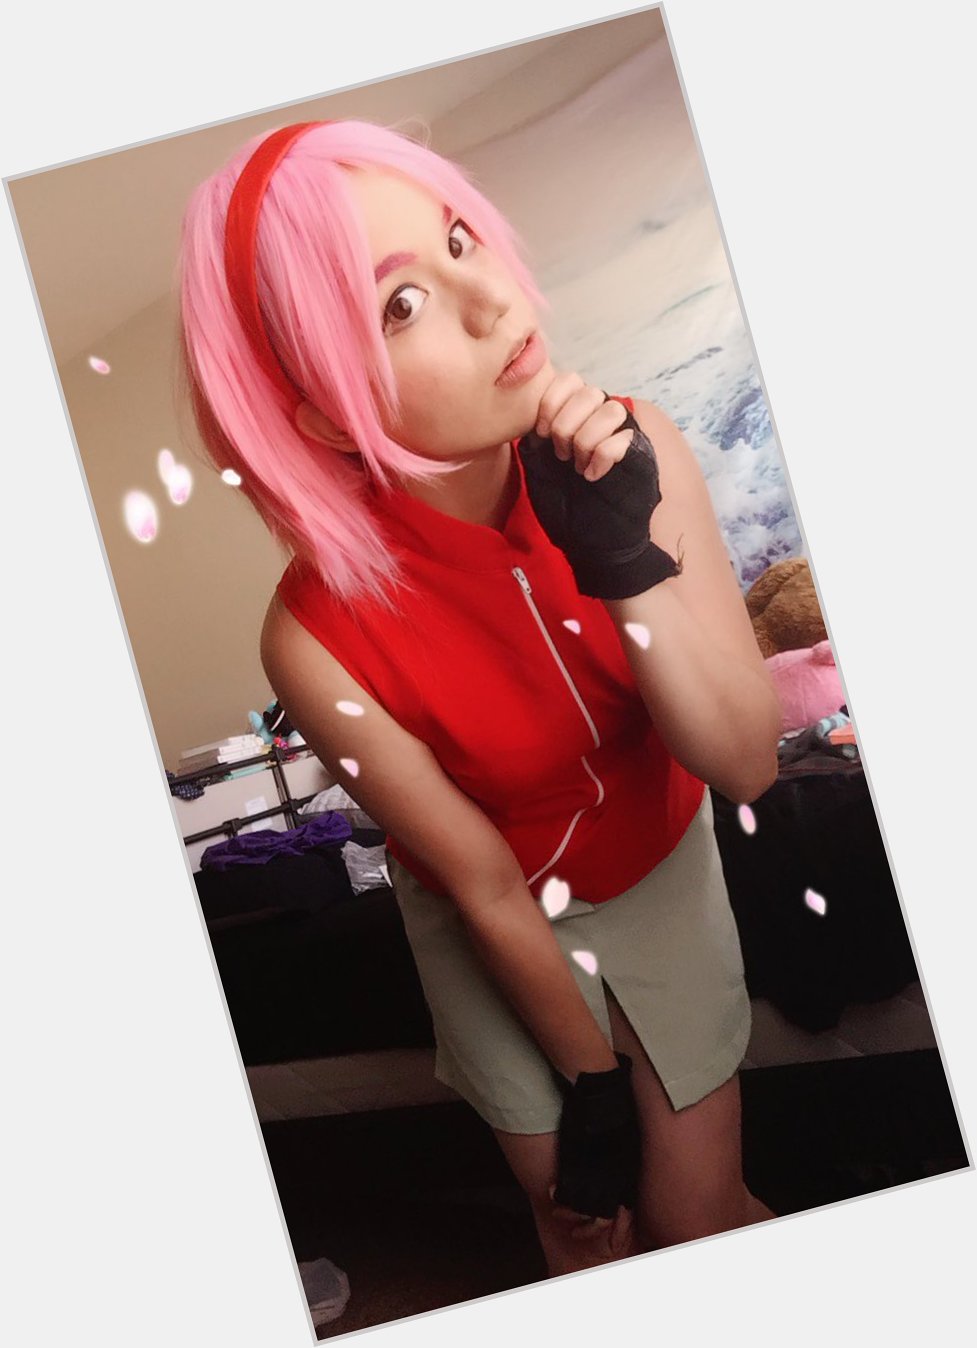 Happy birthday Sakura Haruno!  I don t care what anyone says, Sakura is a queen and deserves so much better!   